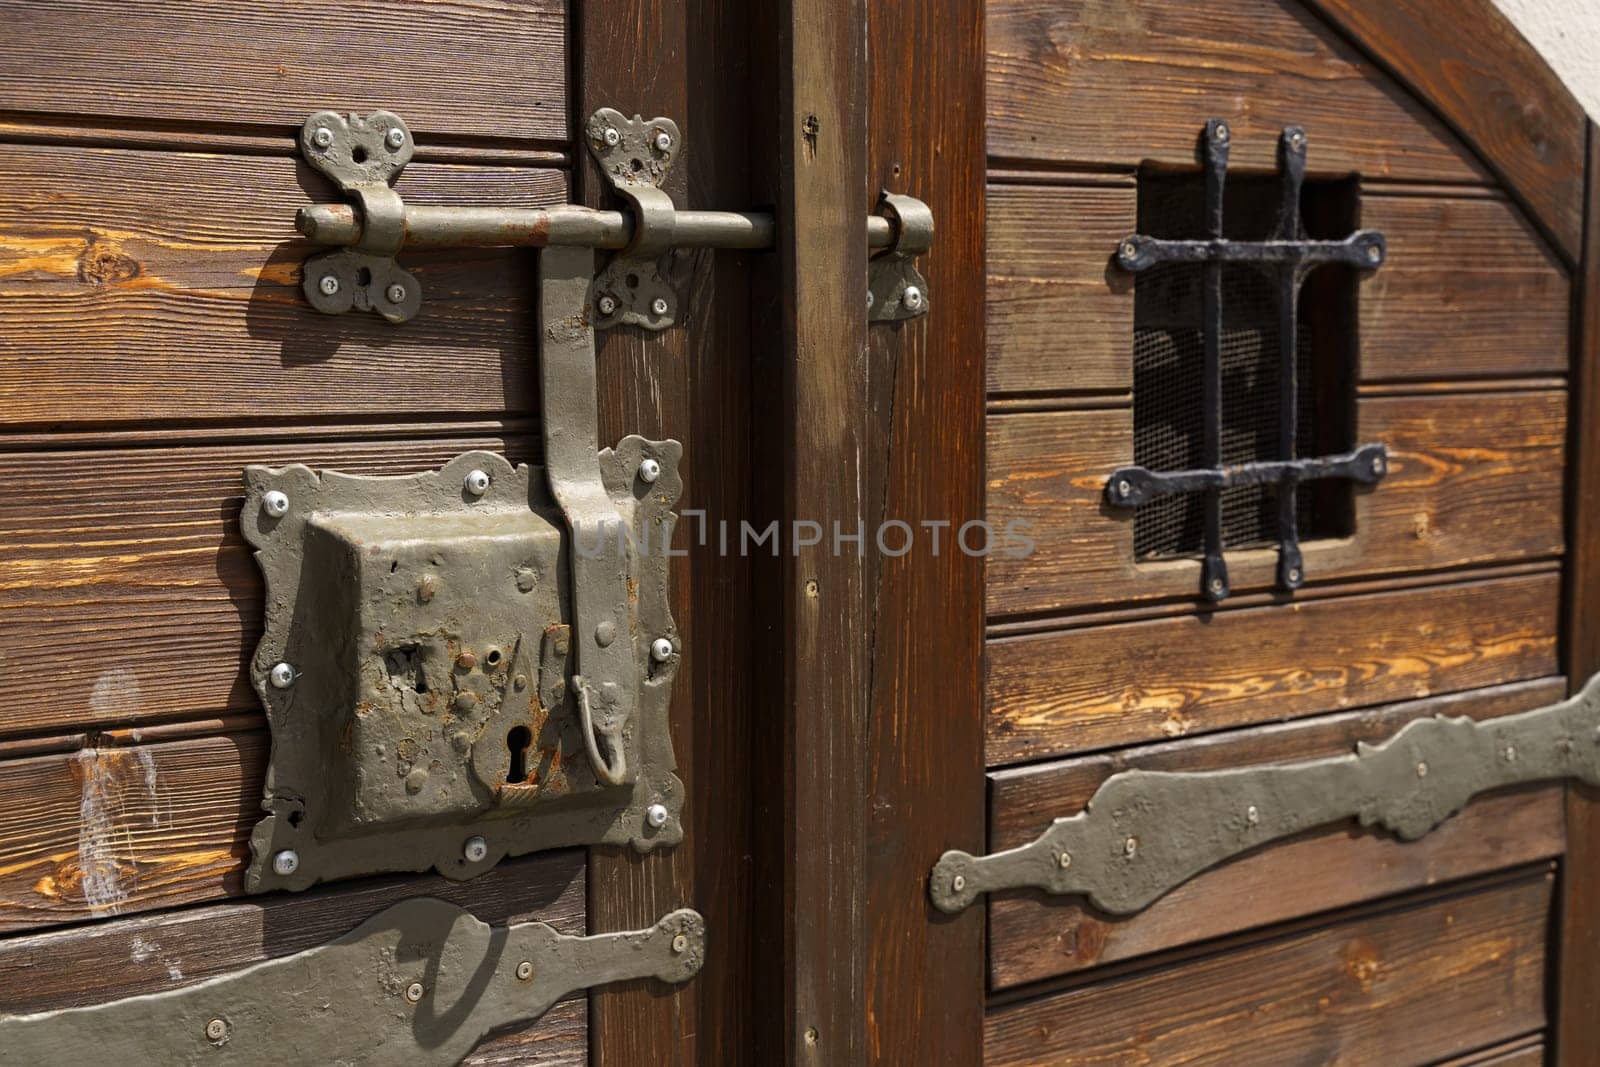 A close-up shot of an intricate iron lock and latch on a weathered wooden door.